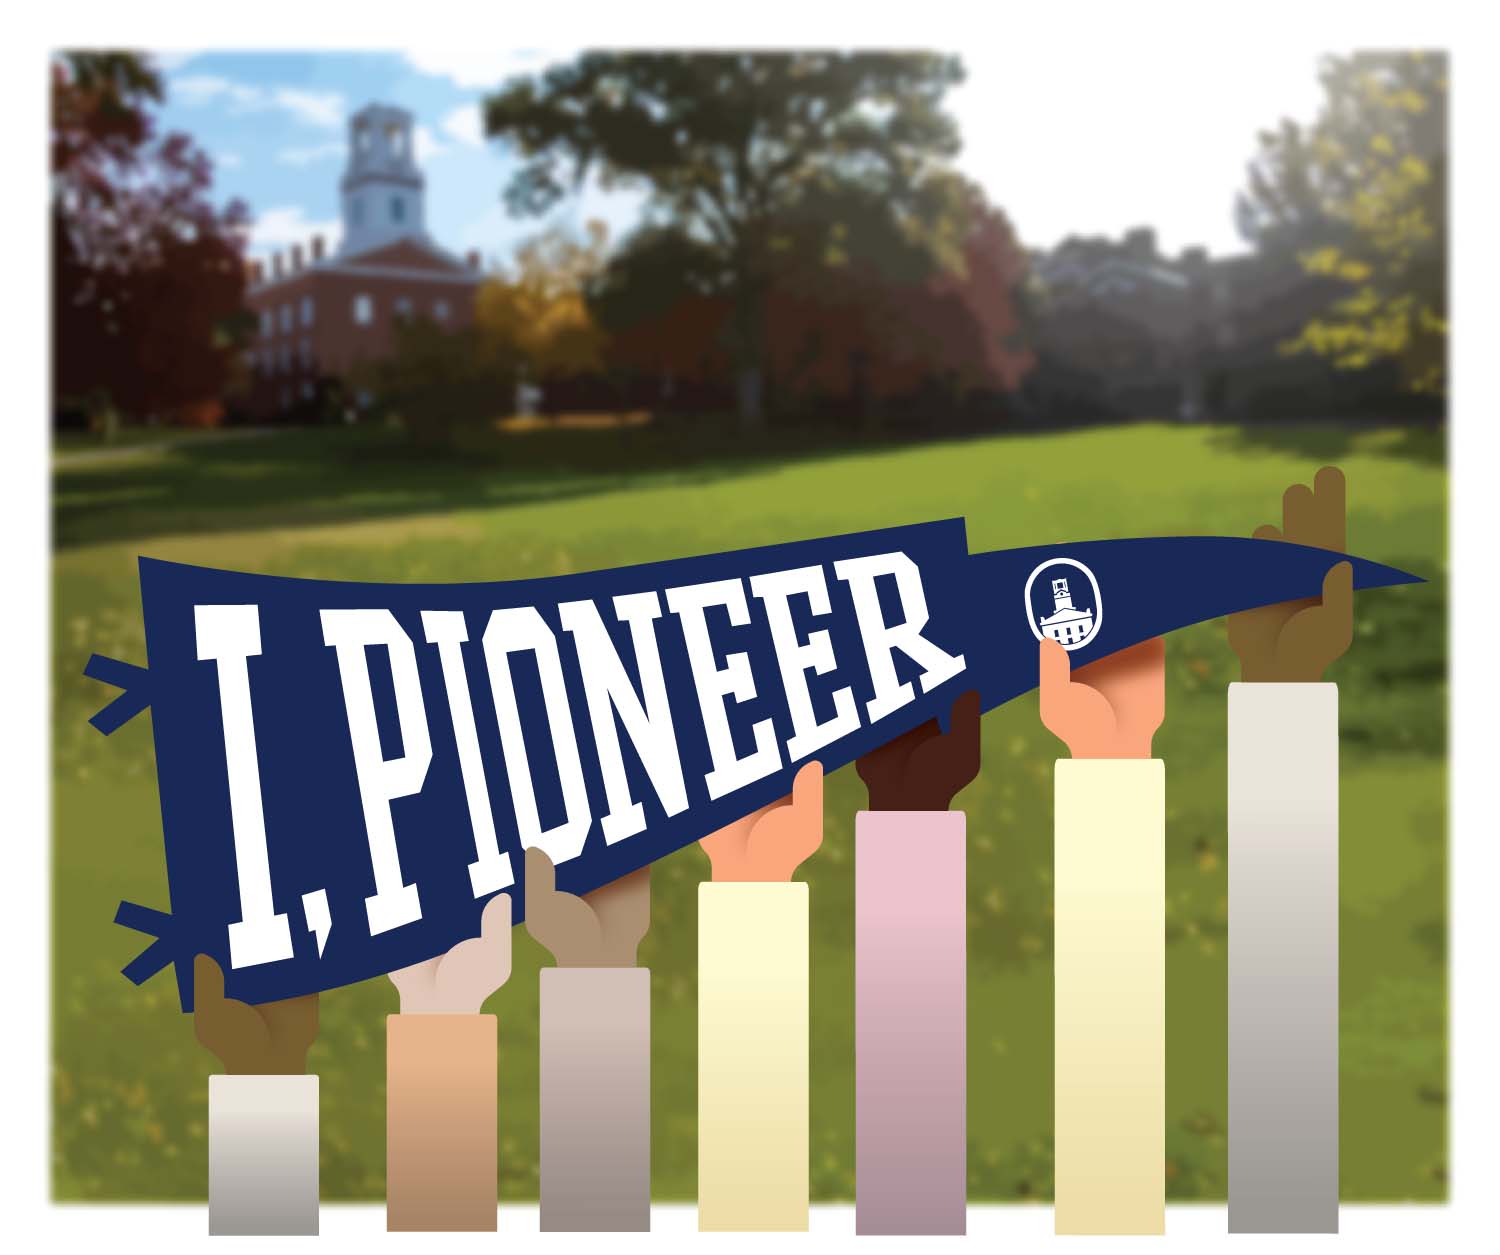 Image of hands holding up I, Pioneer banner